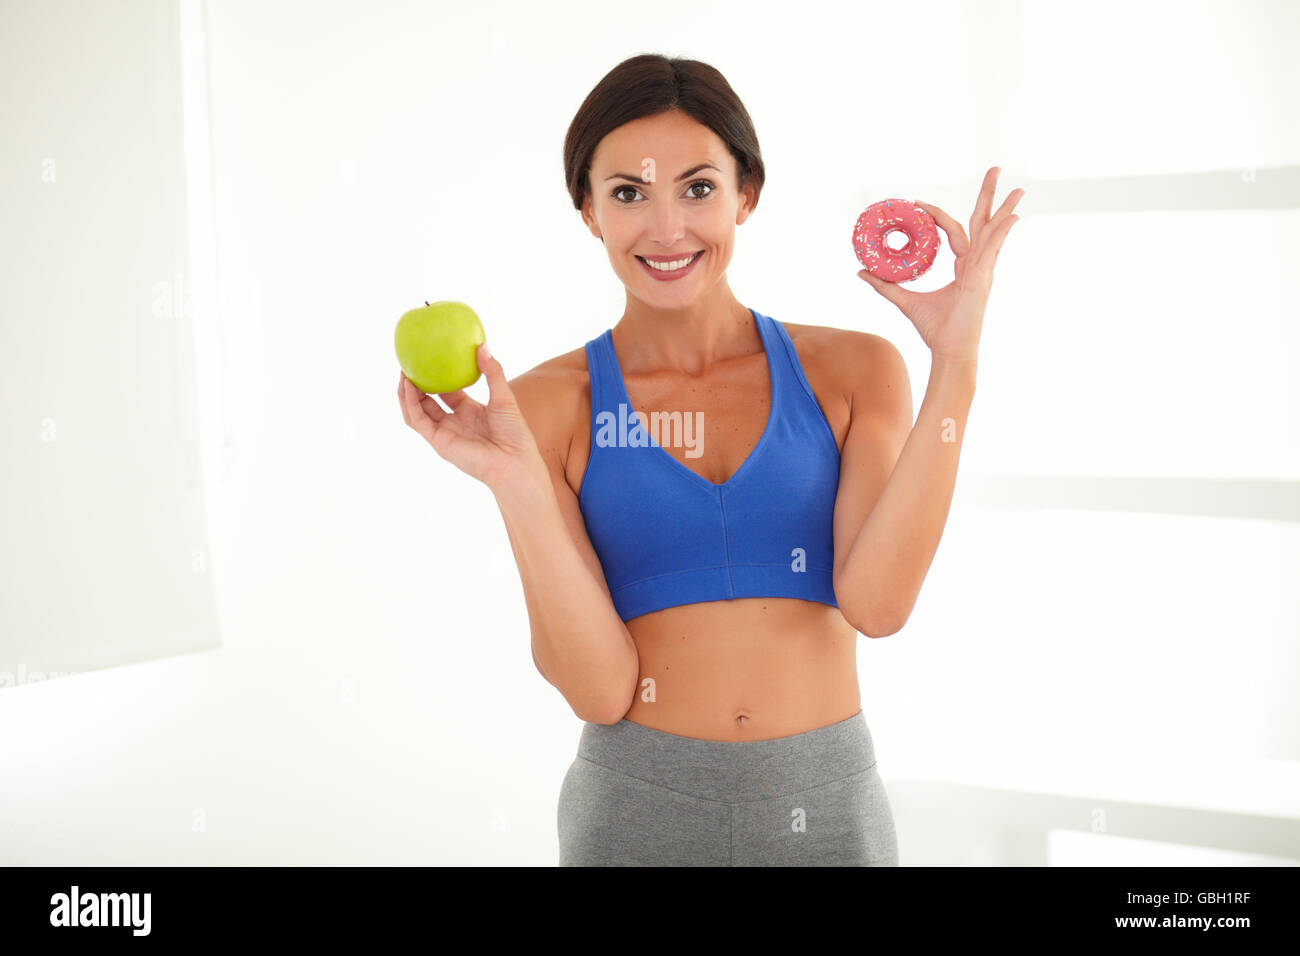 Smiling sporty lady on a diet deciding between apple and sugary donut while looking at you Stock Photo